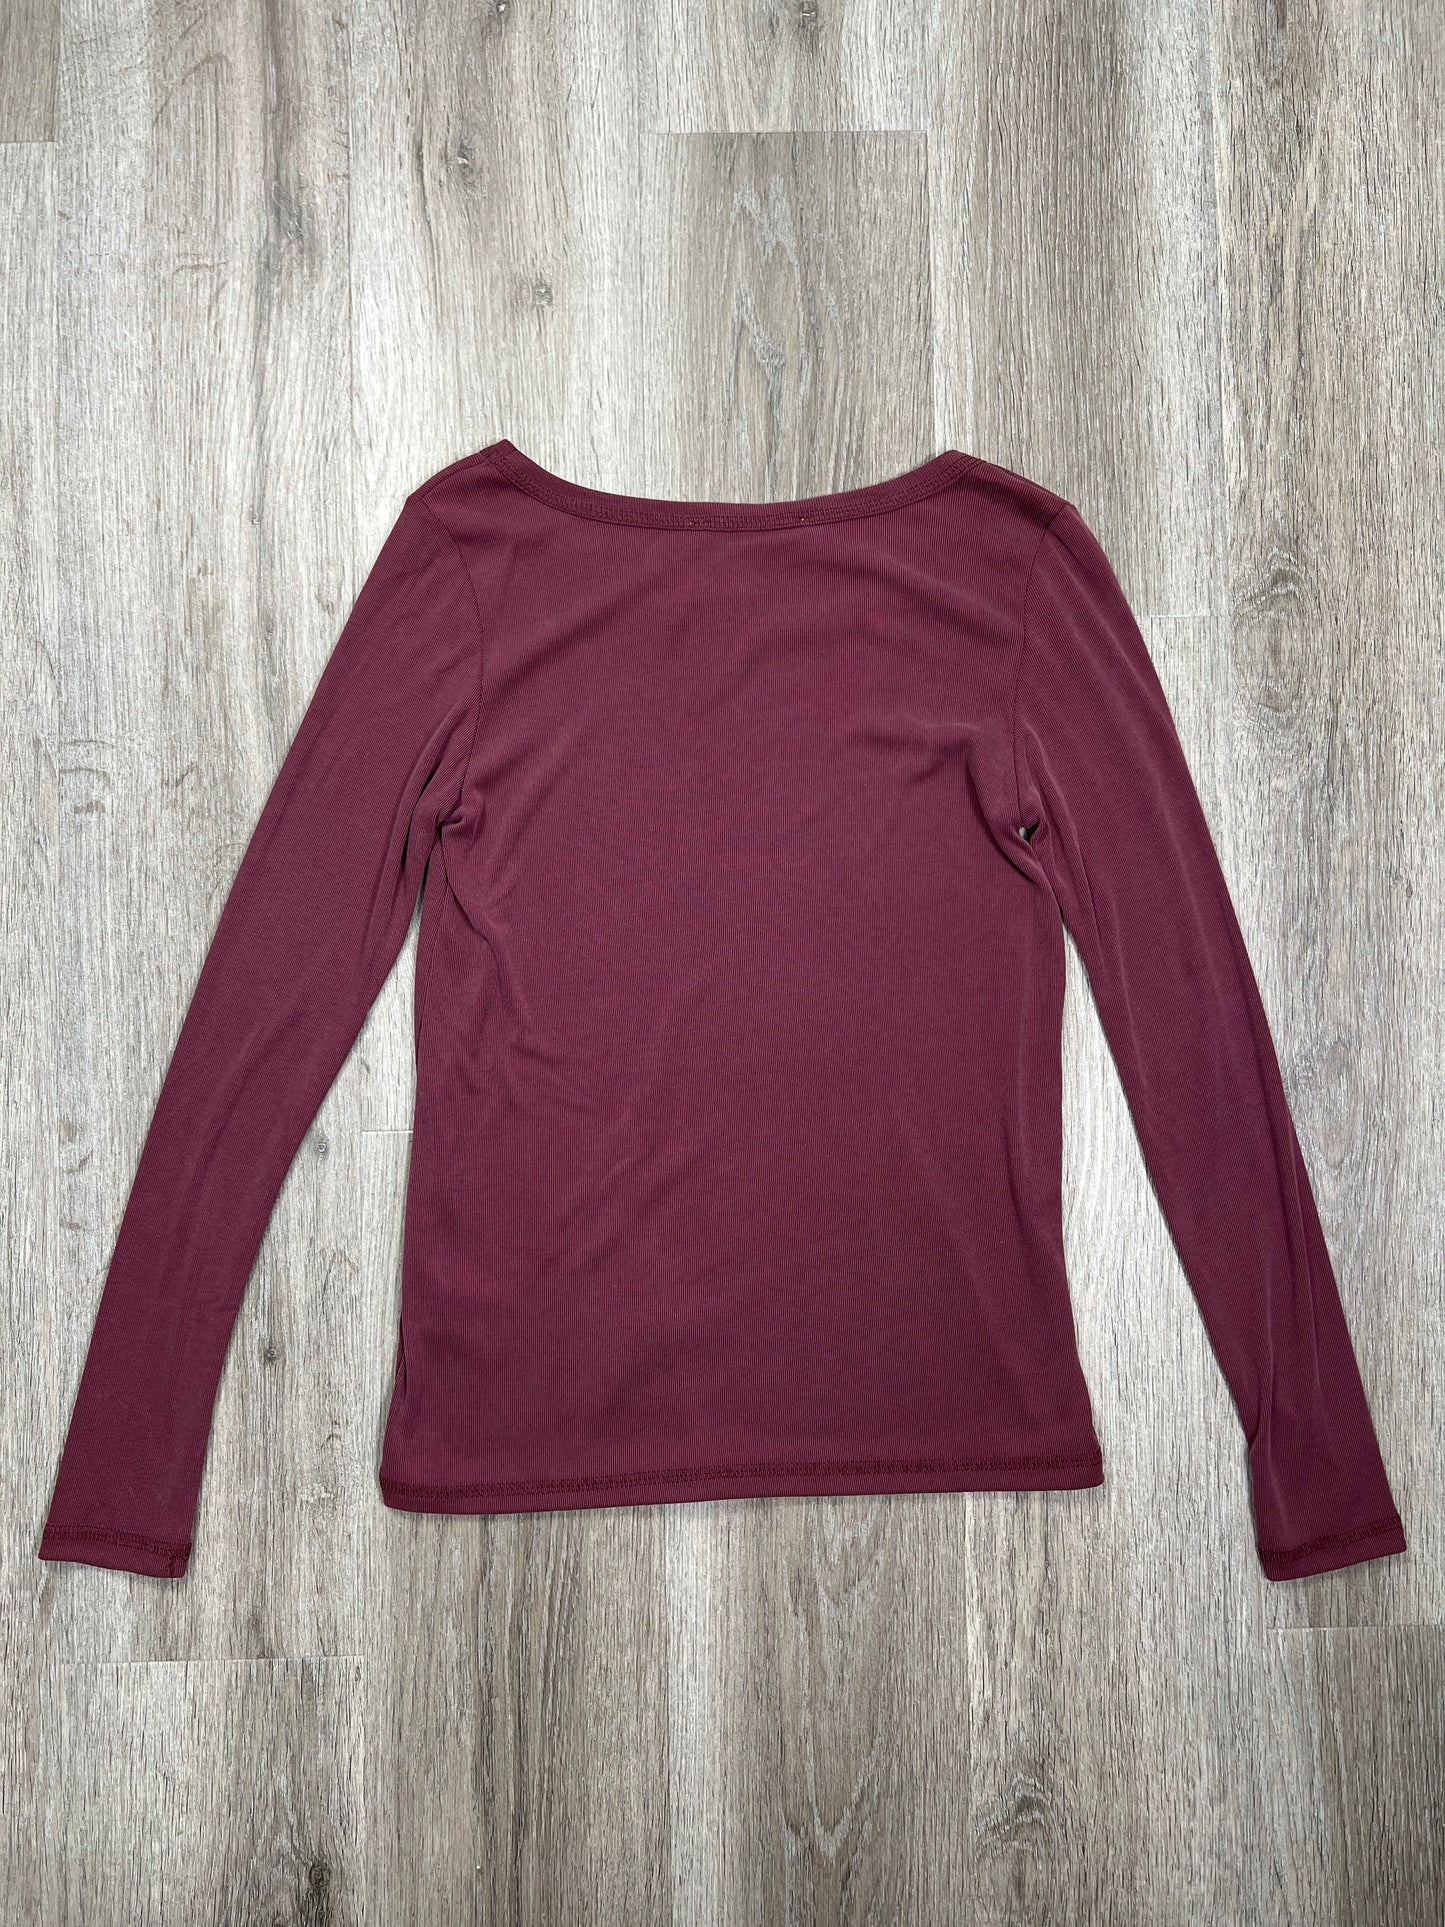 Mauve Top Long Sleeve By Together, Size S